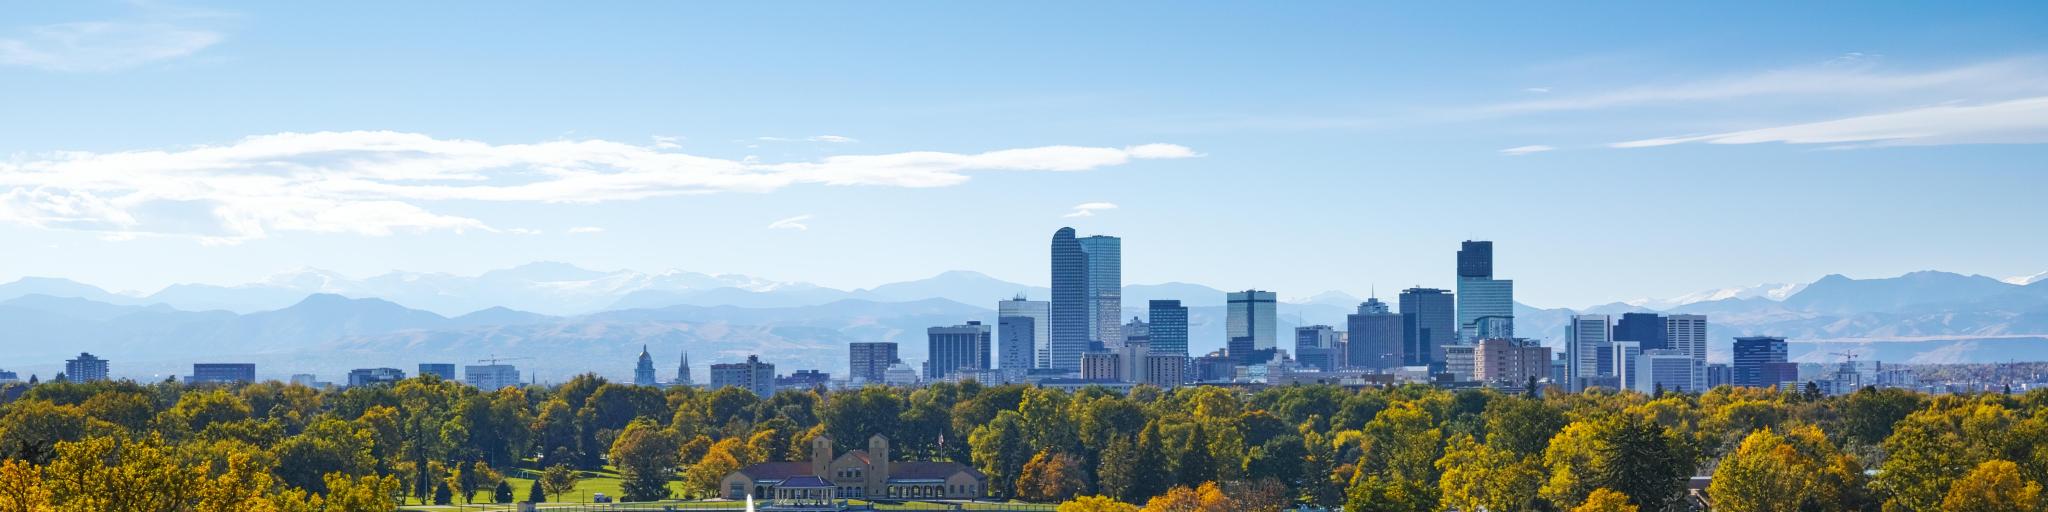 Panoramic view of high rise buildings of Denver skyline with green trees in the foreground and rocky mountains in the background